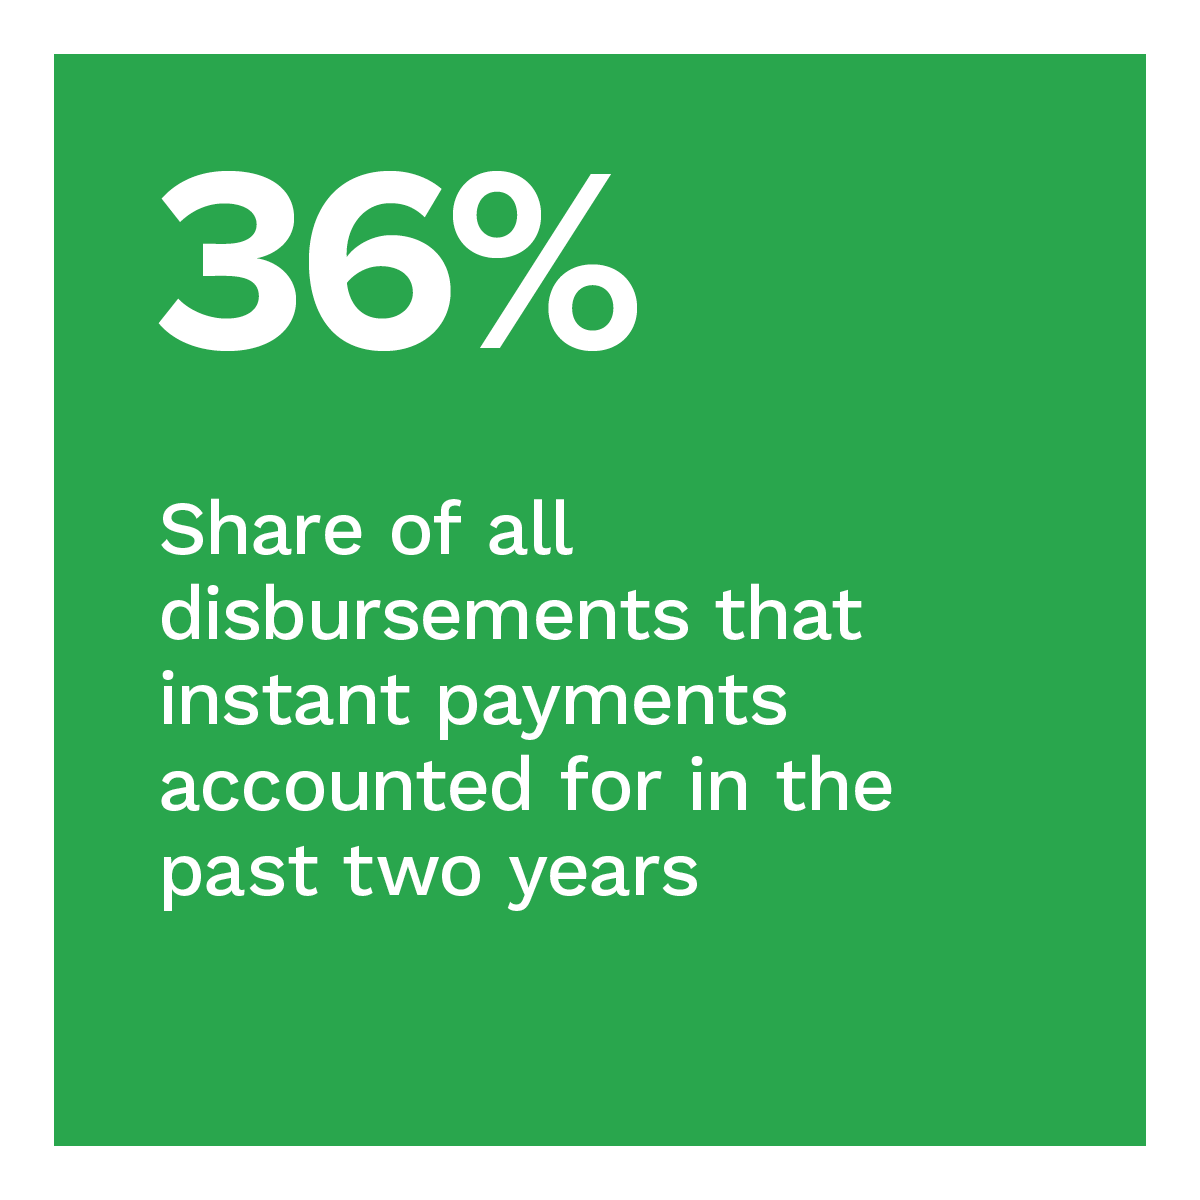 36%: Share of all disbursements that instant payments accounted for in the past two years